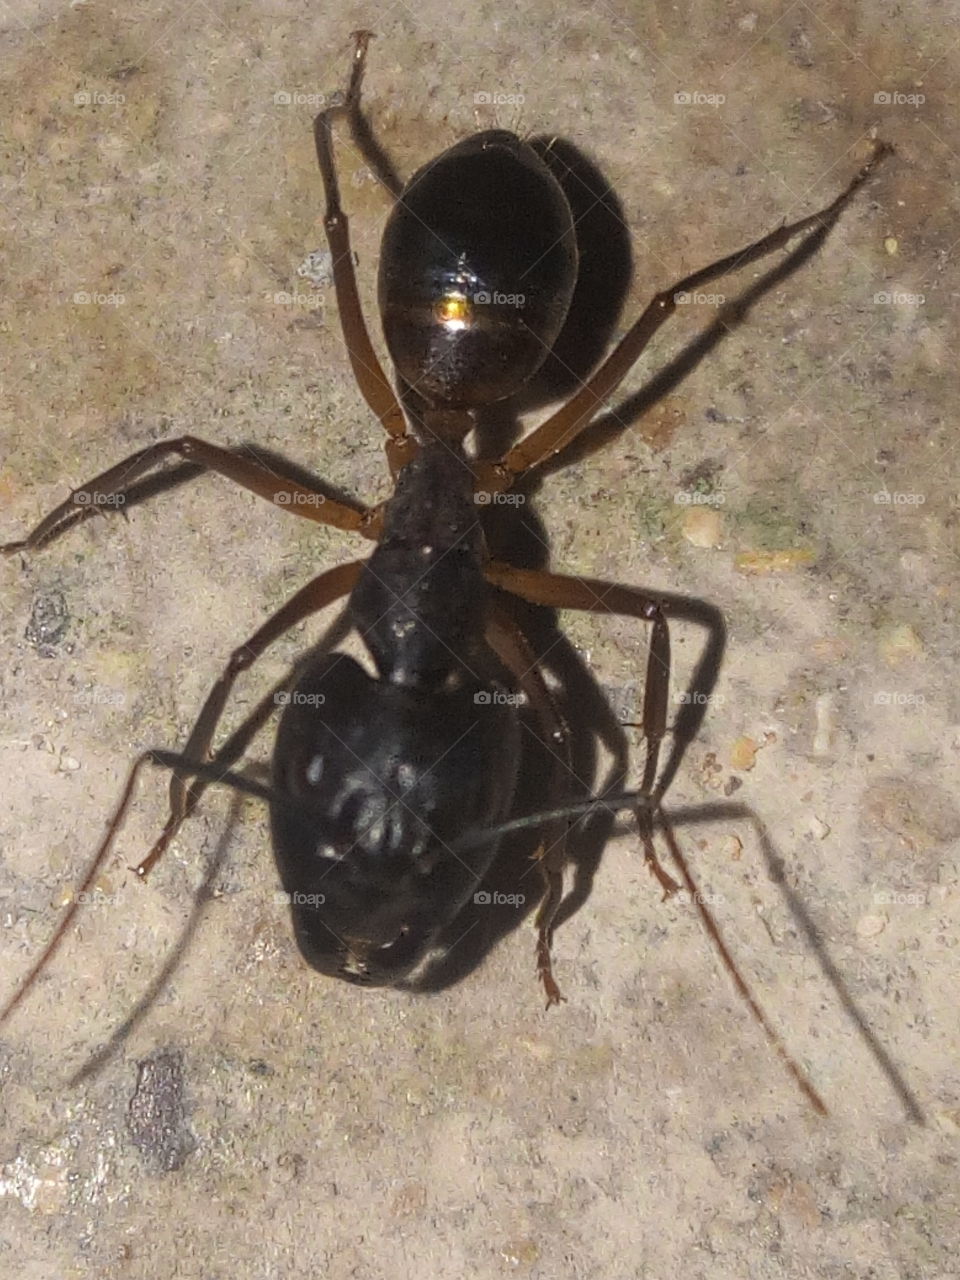 The bite of this ant will make you yell high